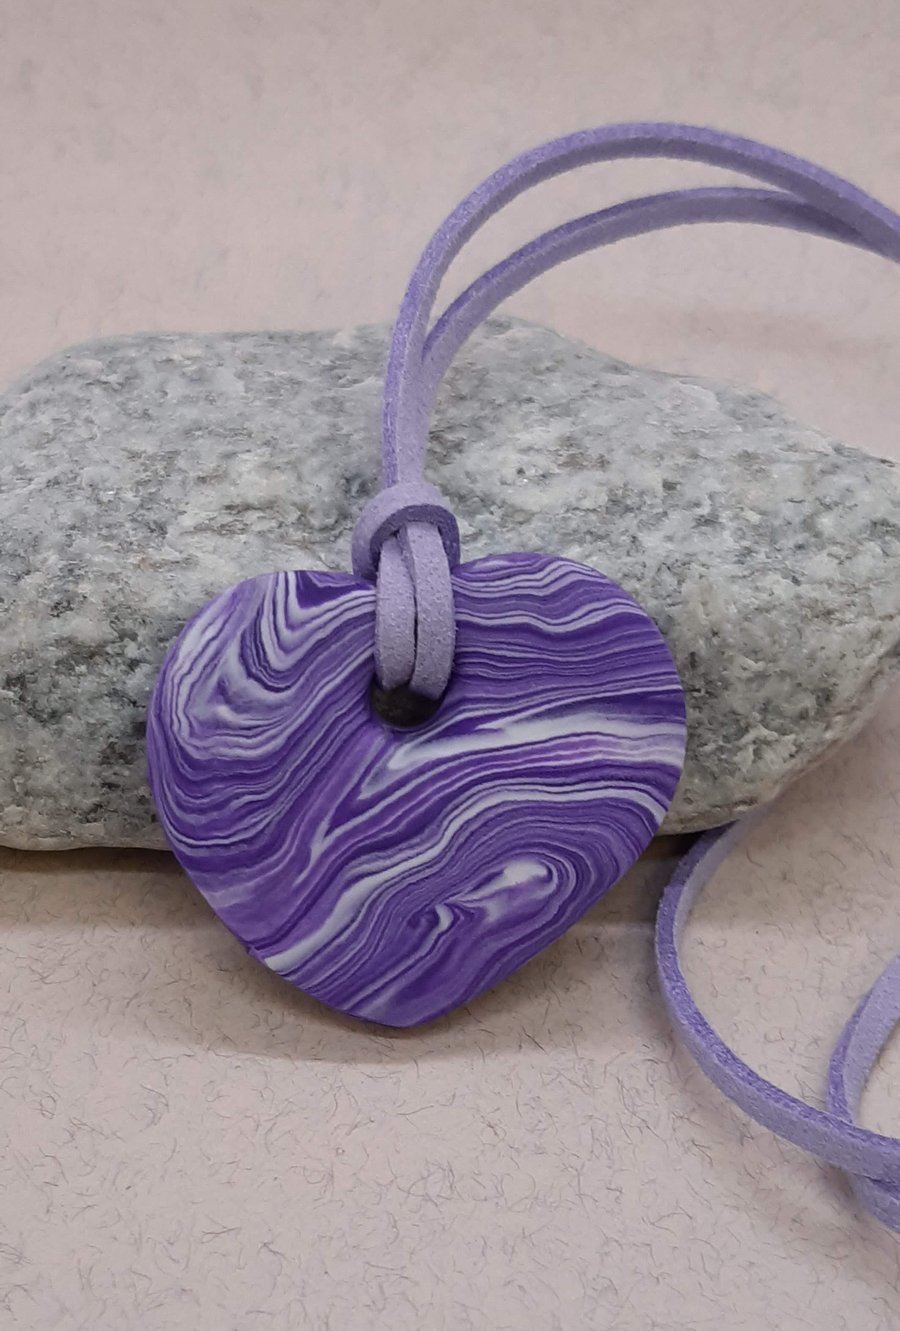 Purple and white heart shaped polymer clay pendant